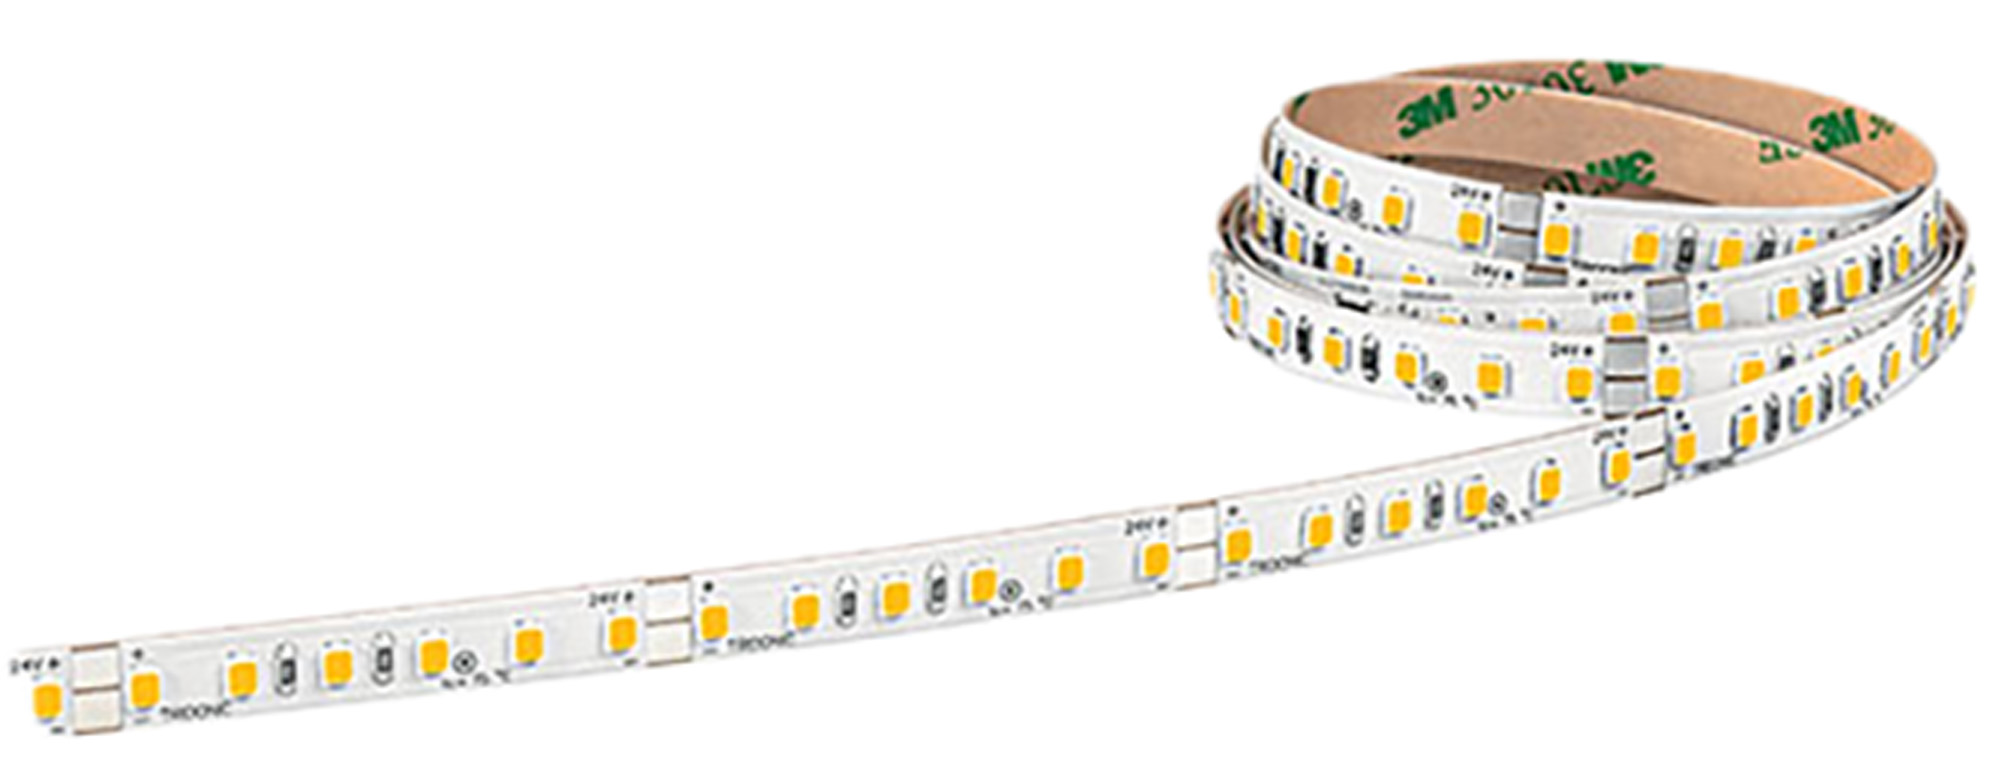 LLE FLEX Components Tridonic LED Boards